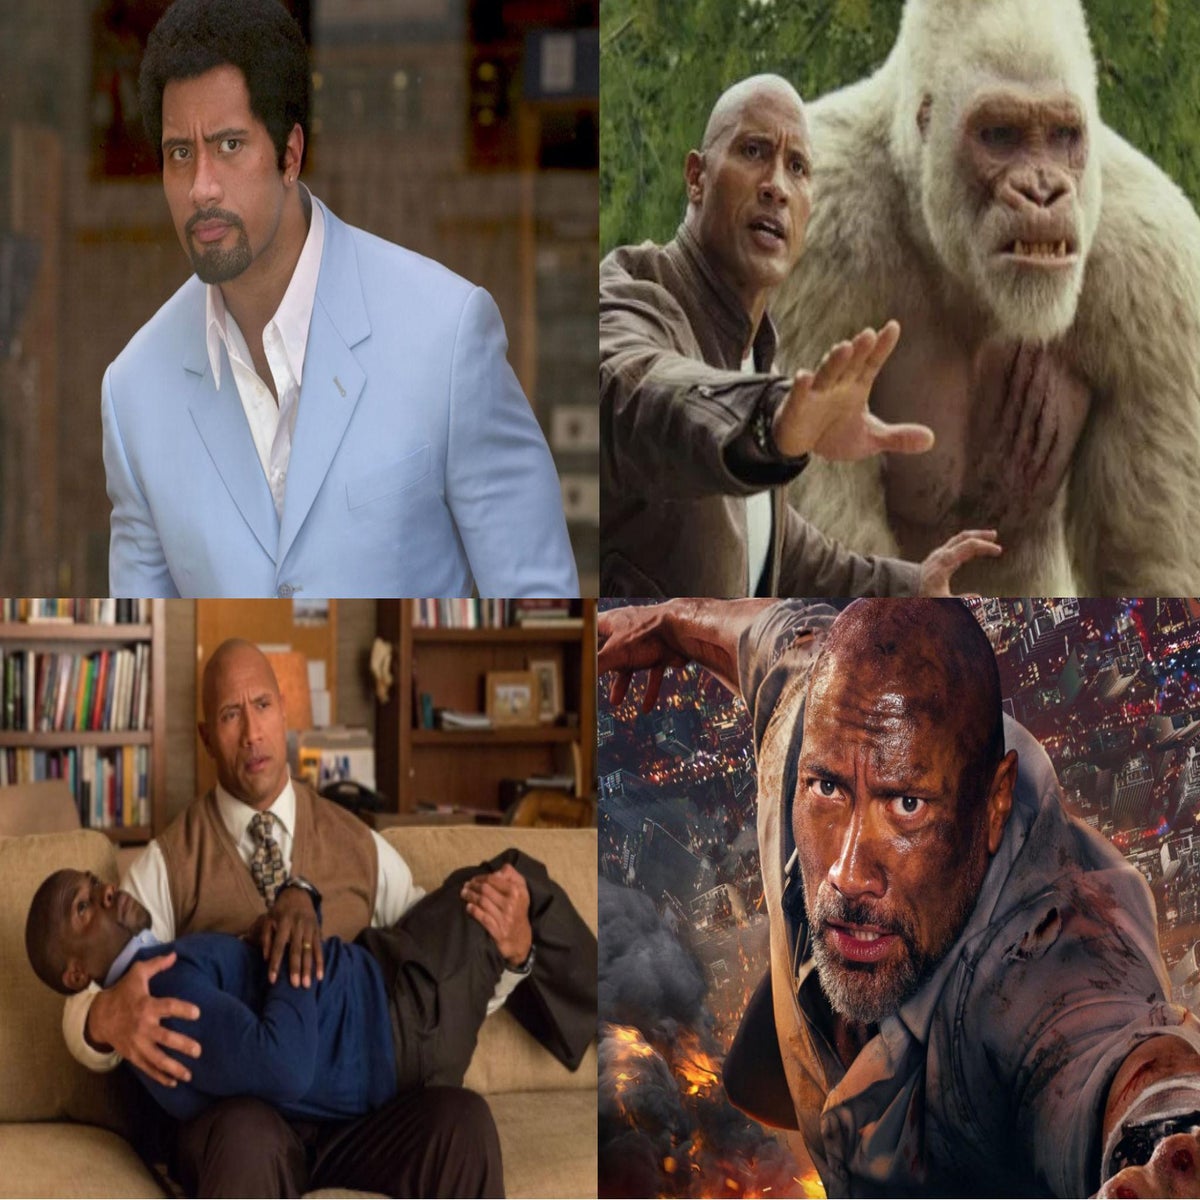 Height difference in movies, Dwayne The Rock Johnson